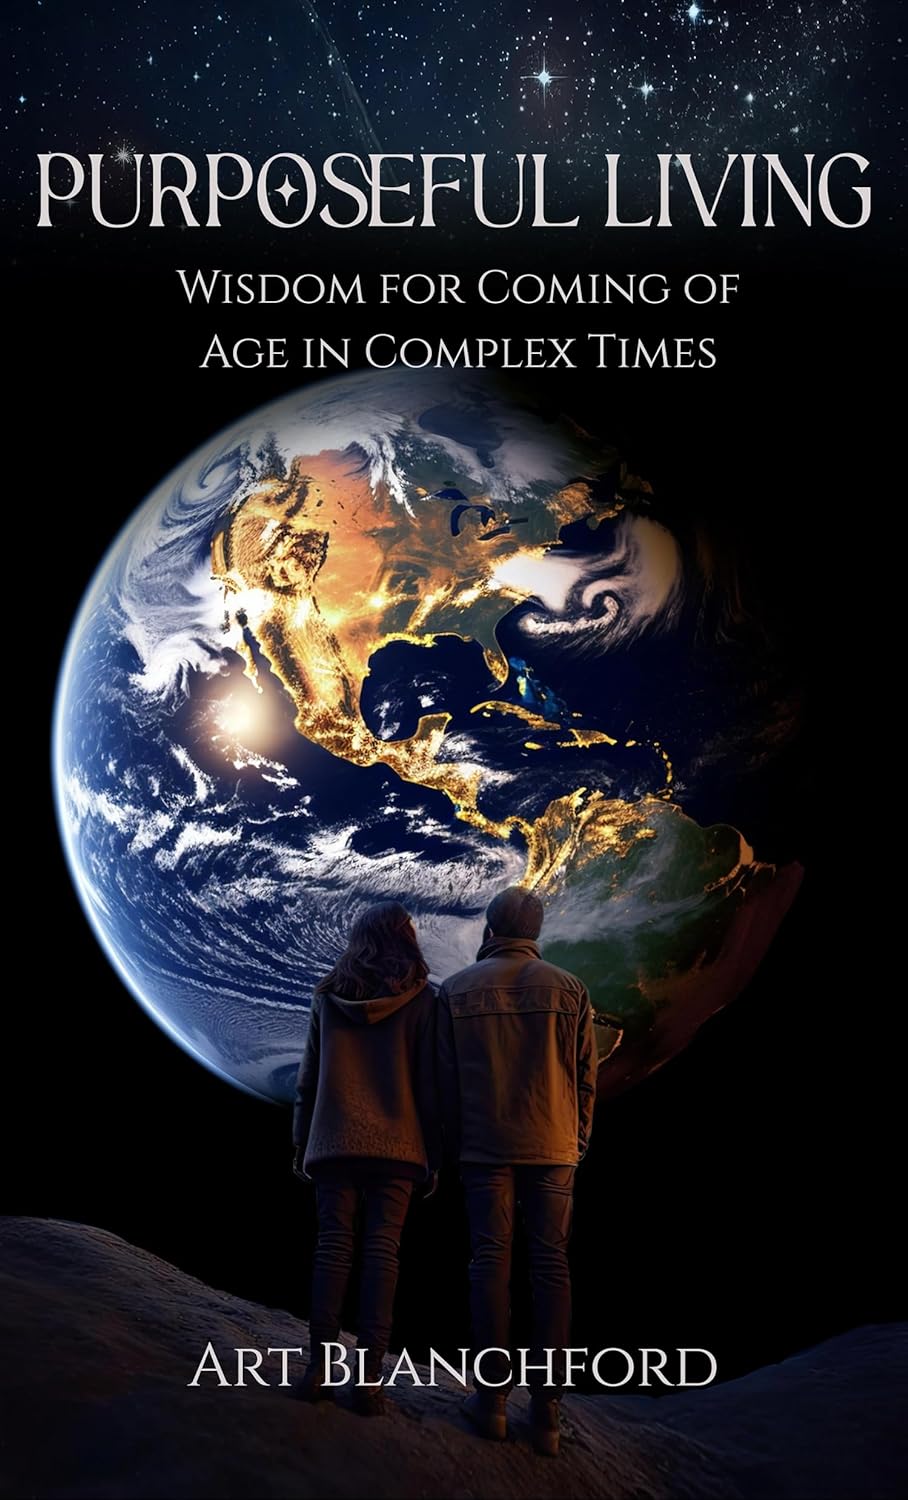 Art Blanchford Releases New Book - Purposeful Living: Wisdom For Coming of Age In Complex Times